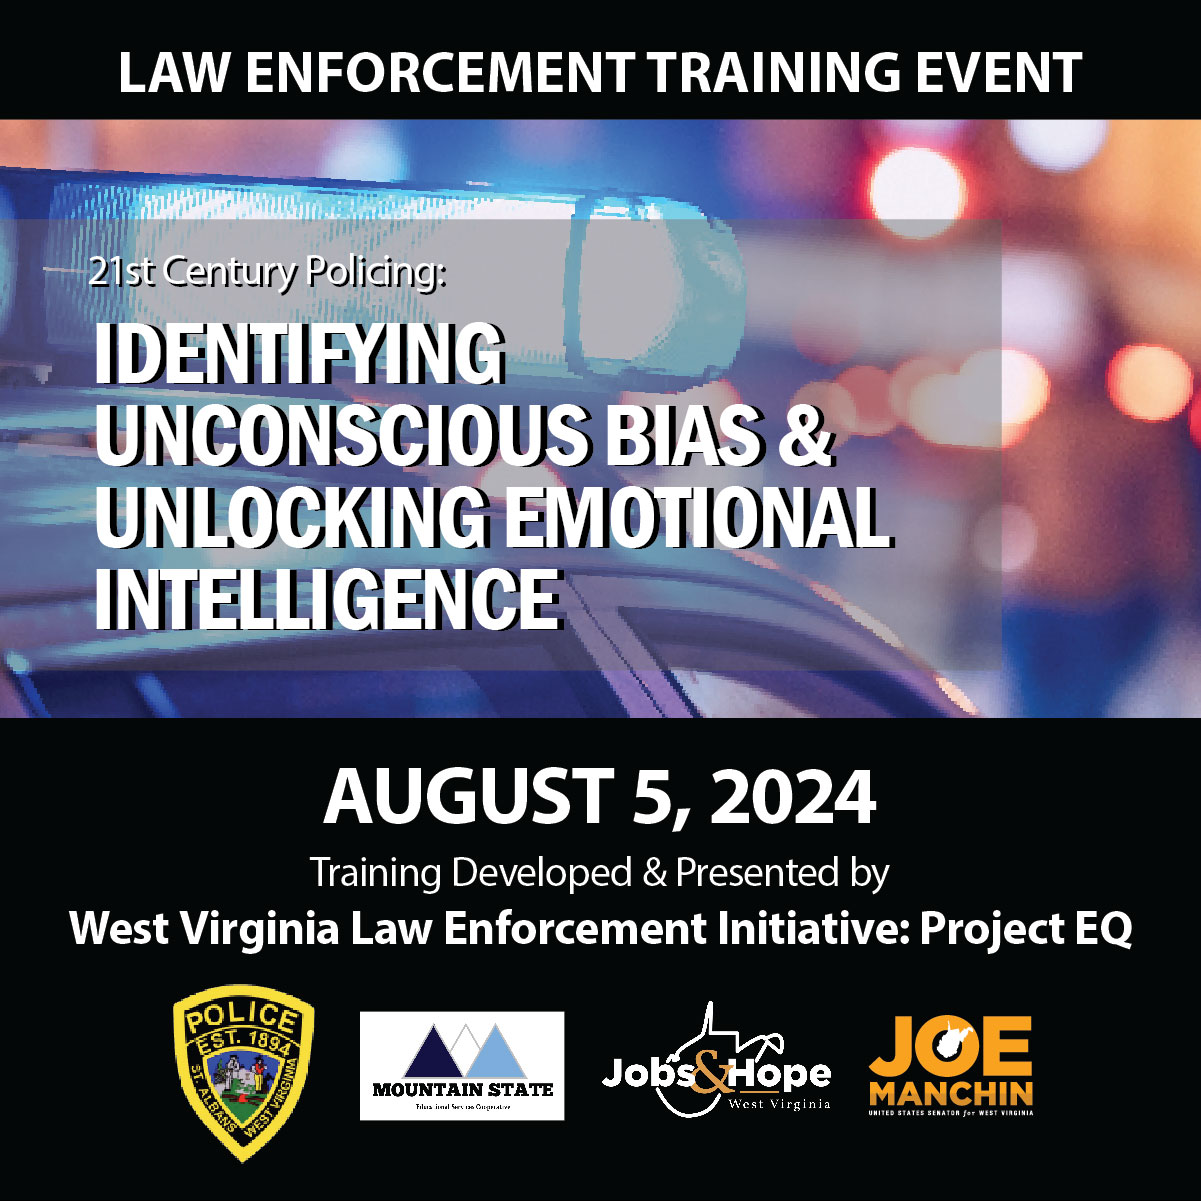 Law Enforcement Training - Join WV Law Enforcement's 21st Century Policing training on August 5, 2024, at St. Albans PD. Learn to manage biases and enhance EQ